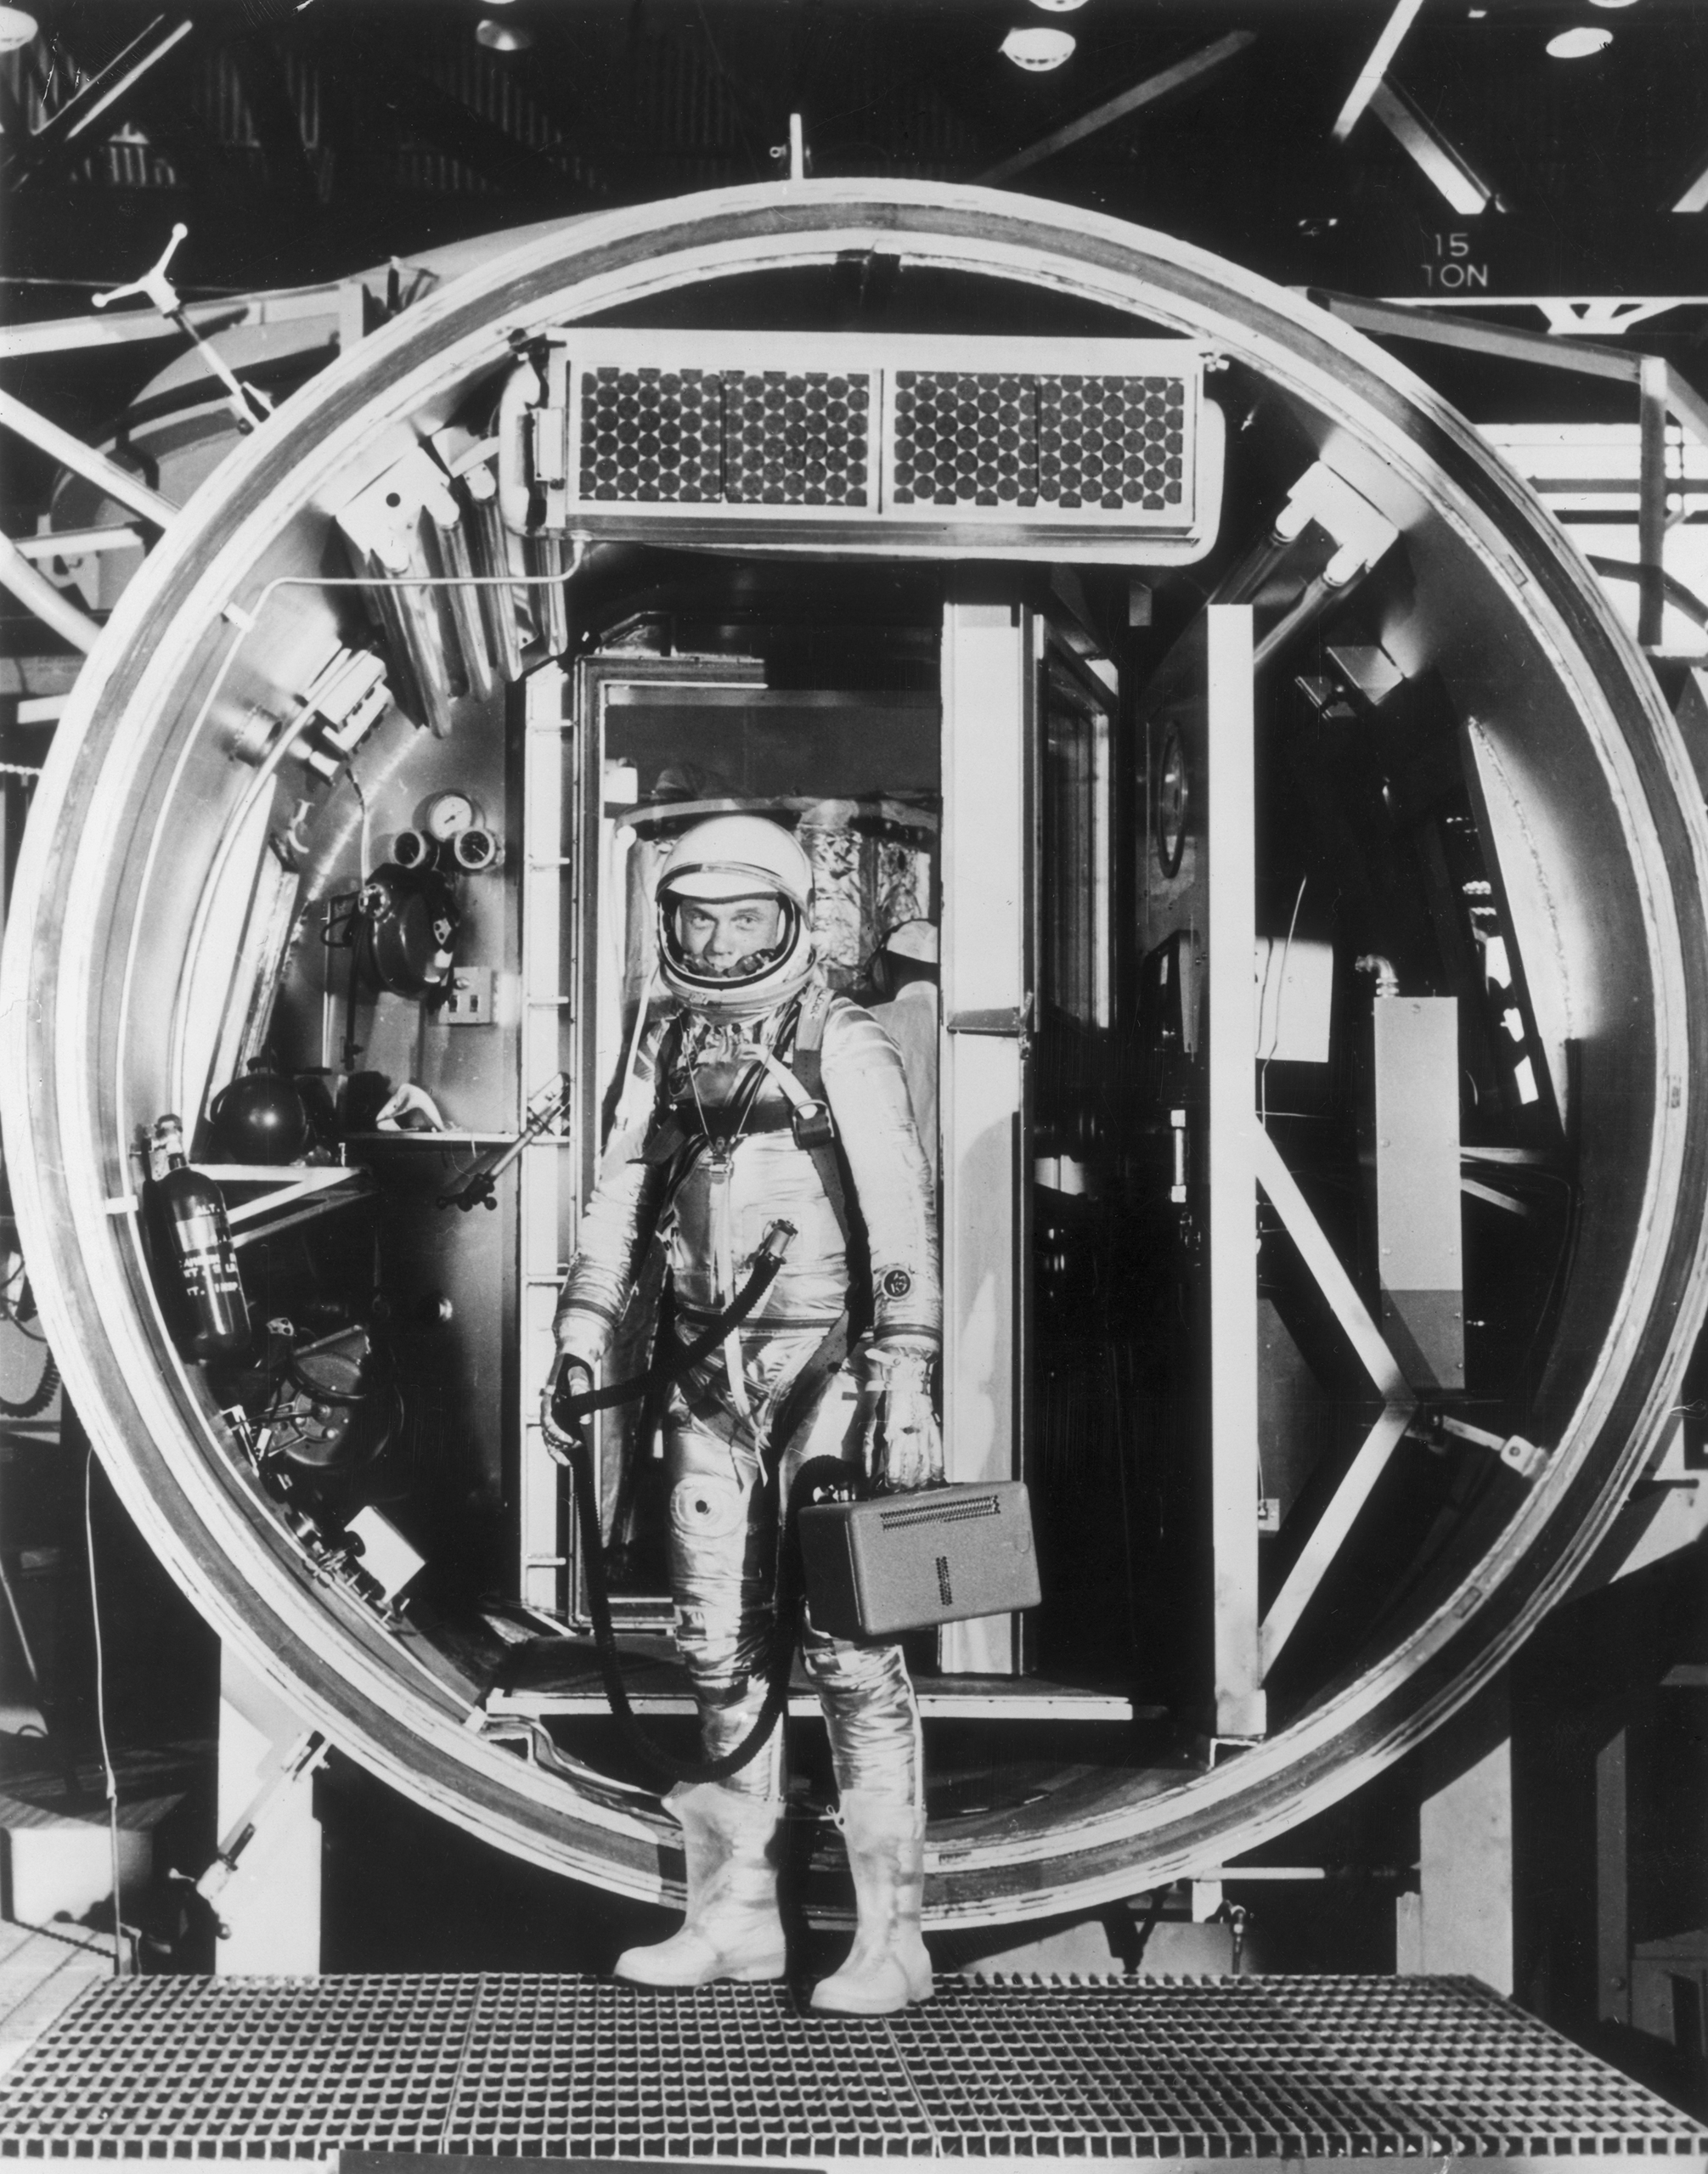 High-Tech Testing Glenn, in 1962, in a fully pressurized suit, prepares to enter an altitude chamber, which simulates air pressure at various stages of flight.